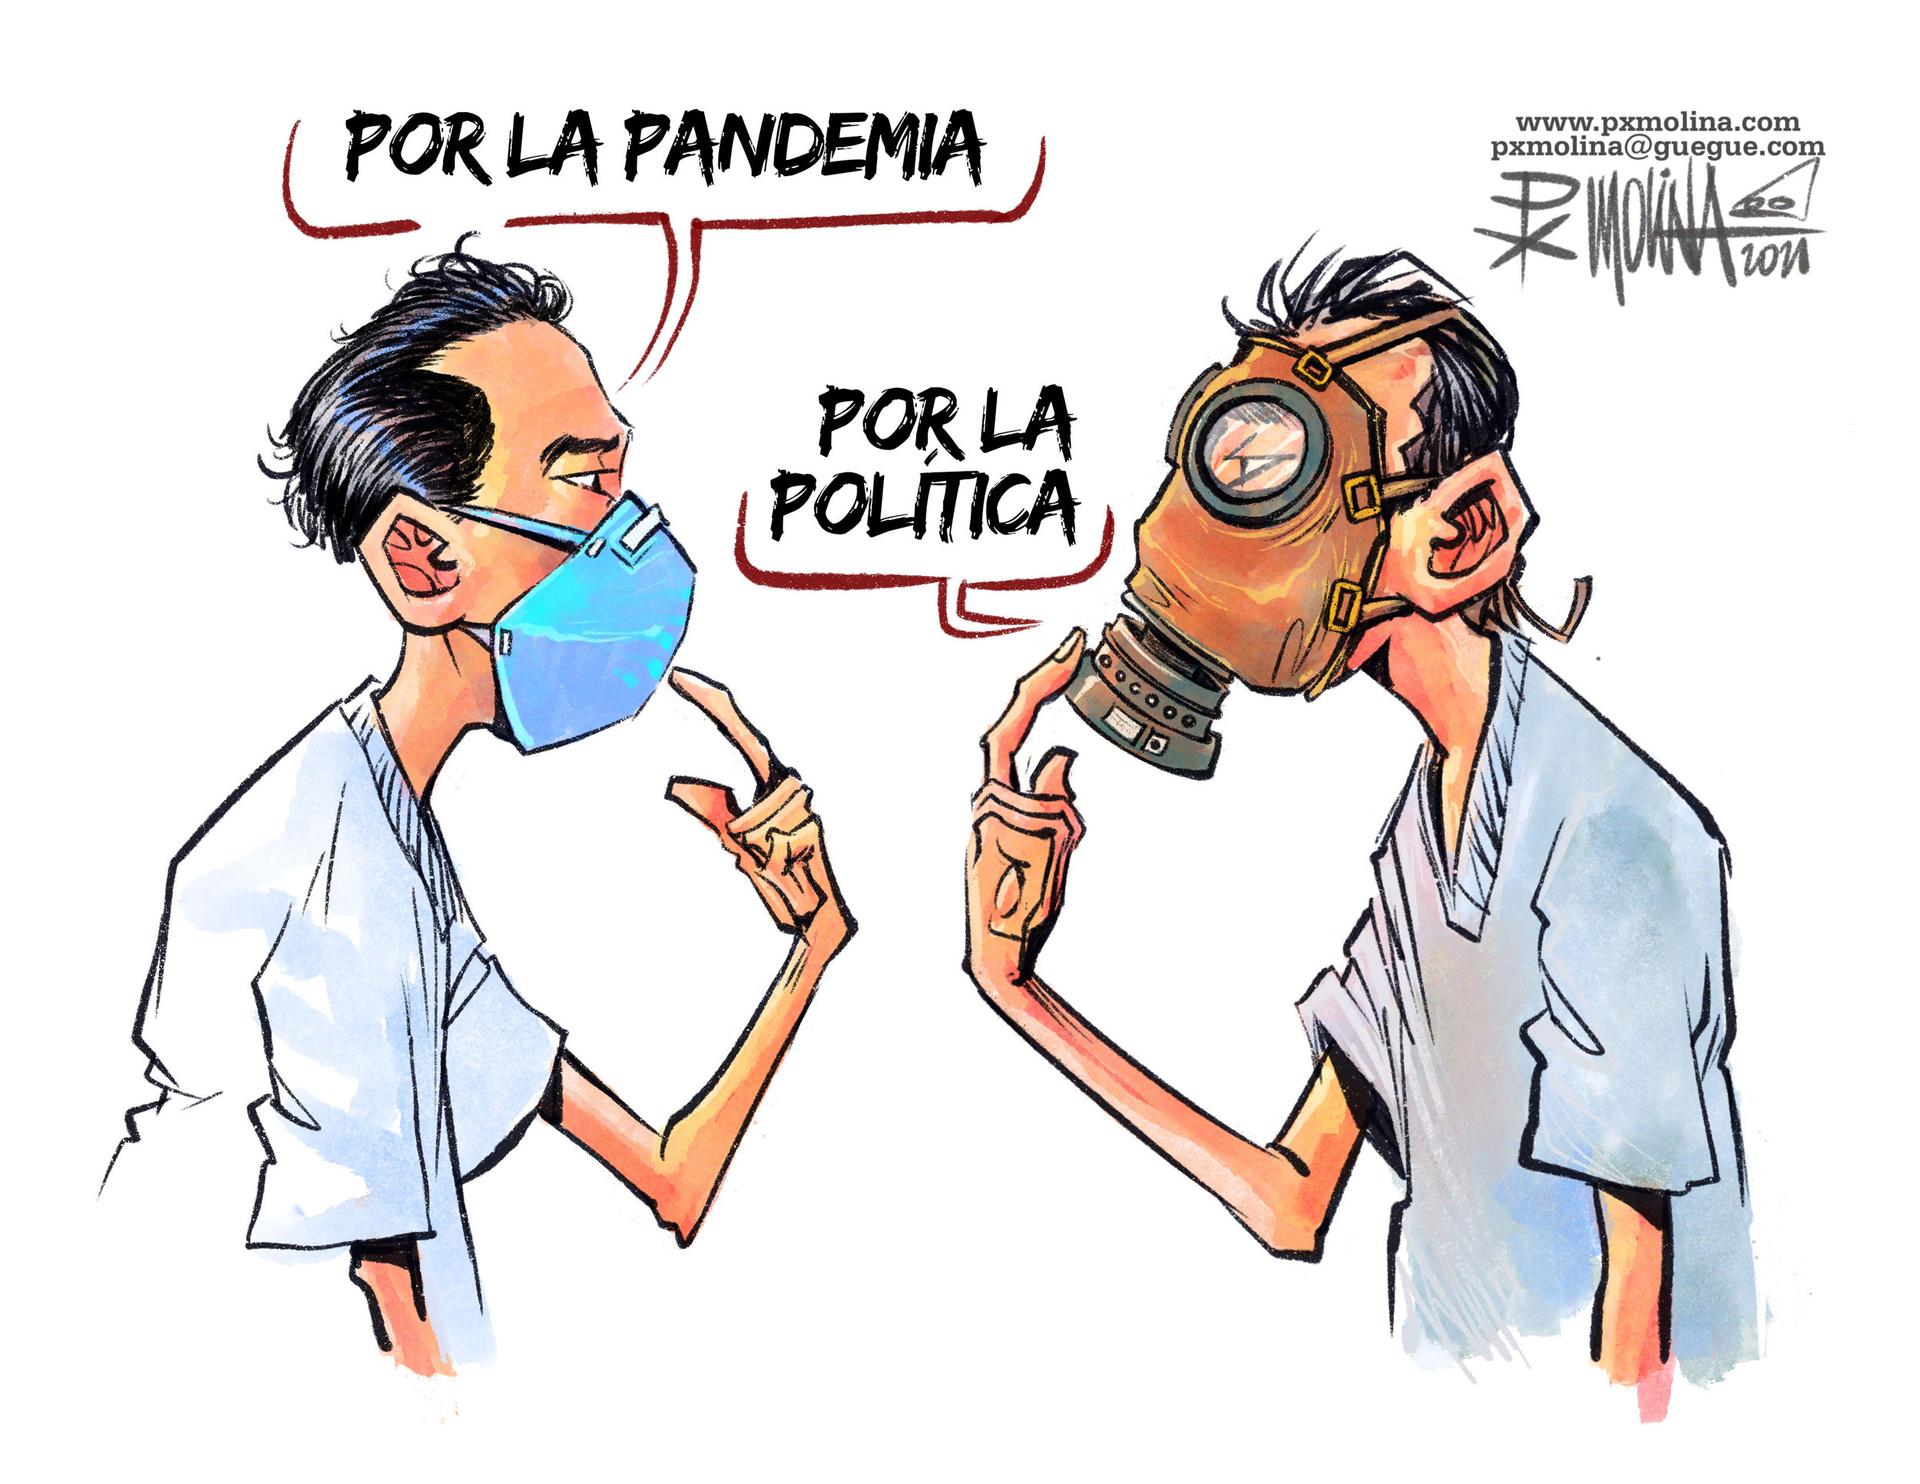 A cartoon showing a man on the left wearing a blue medical mask and a man on the righ wearing a gas mask.